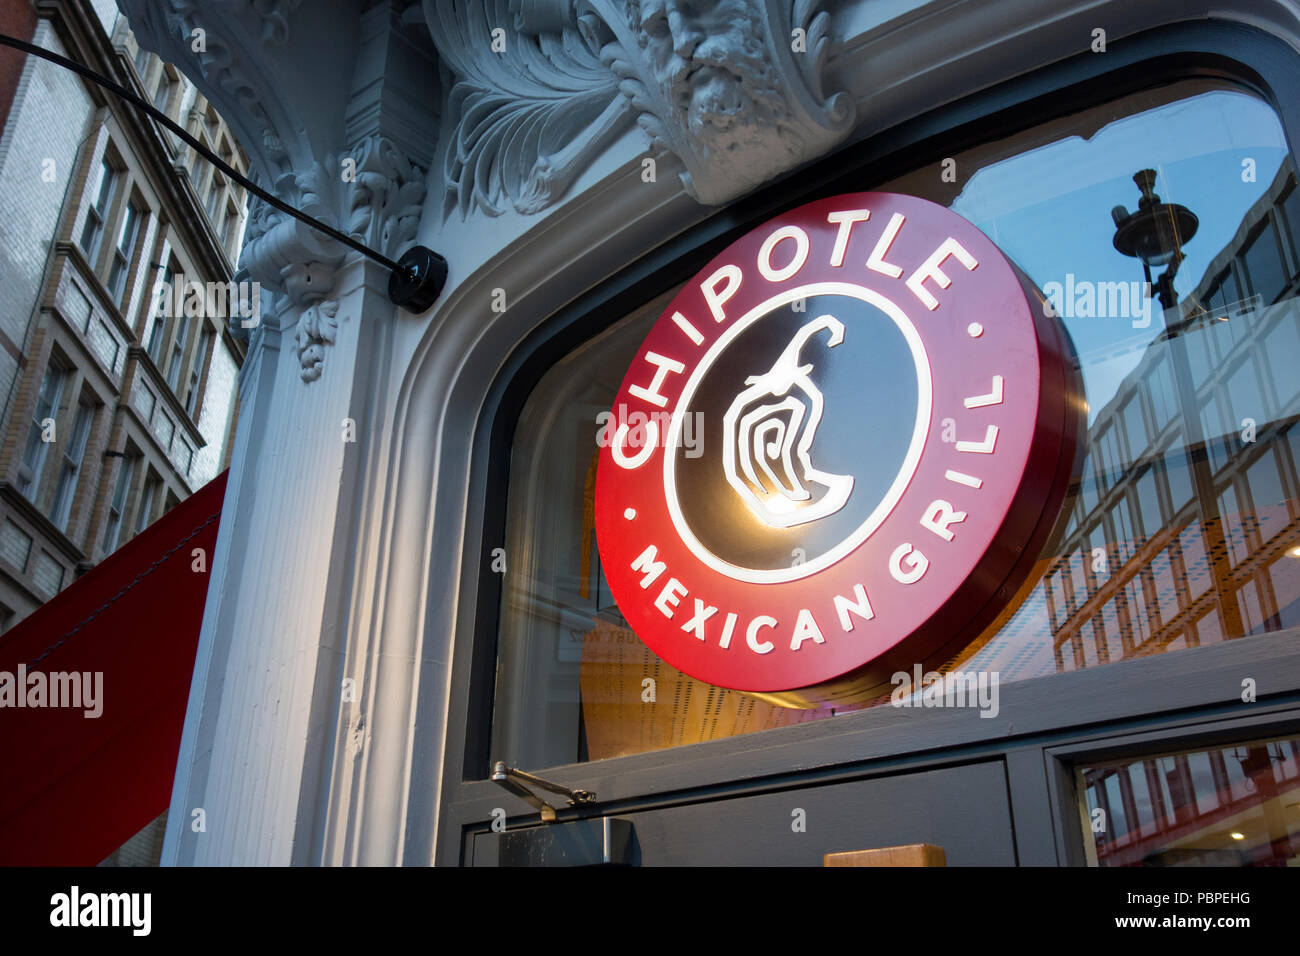 Chipotle Mexican Grill restaurant on St Martins Lane, London, UK Stock Photo